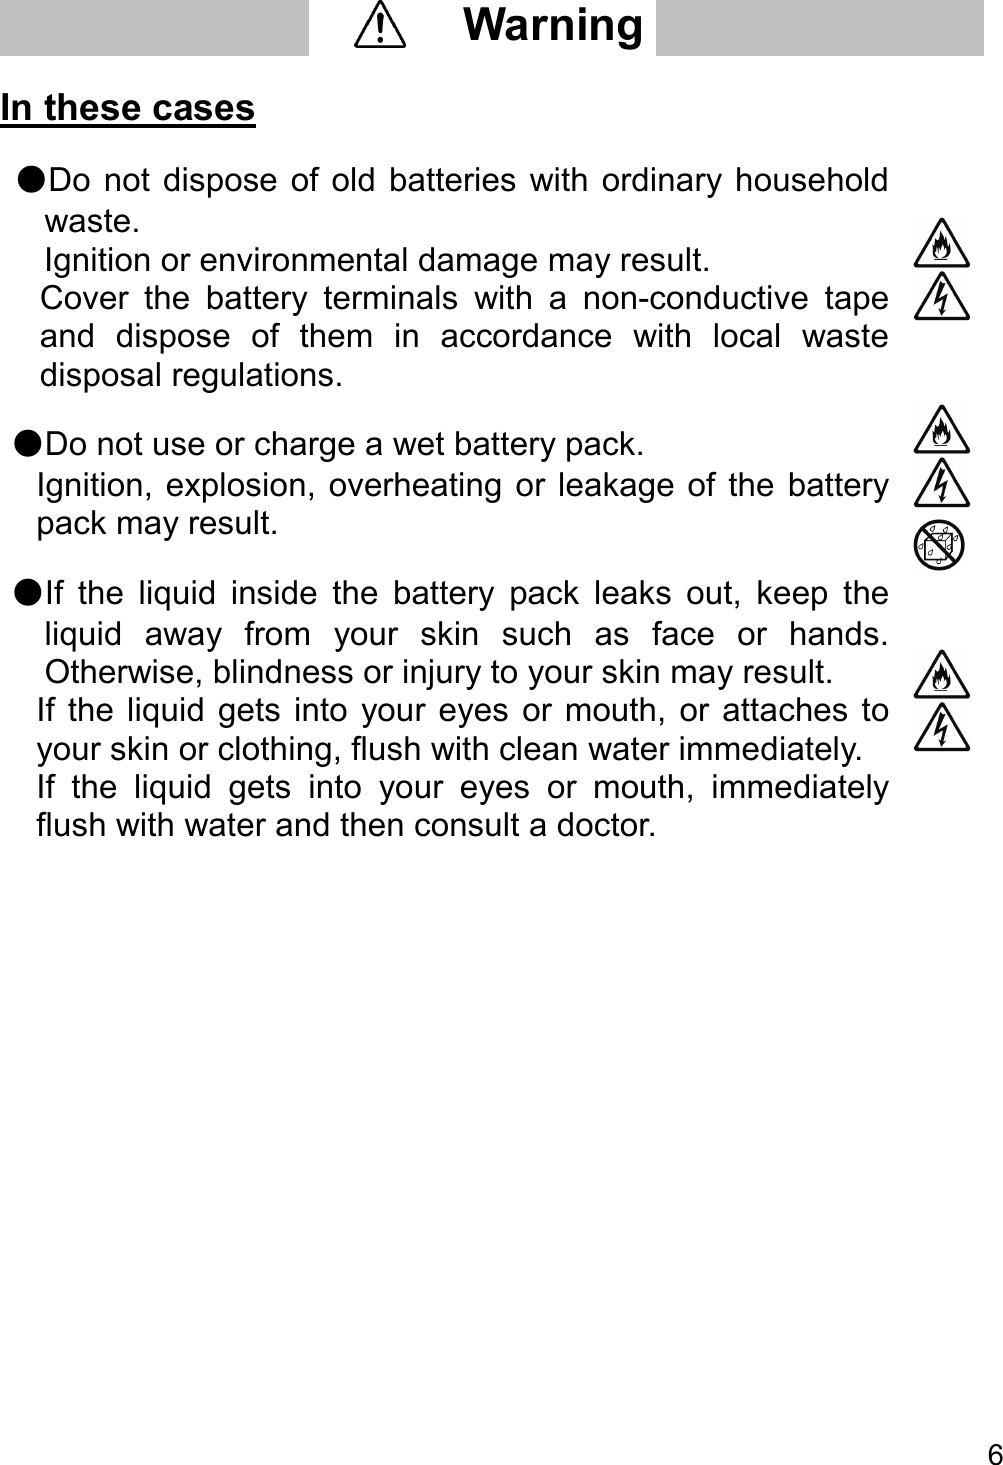   6   In these cases  ●Do  not  dispose  of  old  batteries with ordinary household waste.   Ignition or environmental damage may result.   Cover  the  battery  terminals  with  a  non-conductive  tape and  dispose  of  them  in  accordance  with  local  waste disposal regulations.   ●Do not use or charge a wet battery pack.   Ignition, explosion, overheating or leakage of the  battery pack may result.   ●If  the  liquid  inside  the  battery  pack  leaks  out,  keep  the liquid  away  from  your  skin  such  as  face  or  hands. Otherwise, blindness or injury to your skin may result.   If the liquid  gets into  your  eyes  or  mouth, or  attaches  to your skin or clothing, flush with clean water immediately.   If  the  liquid  gets  into  your  eyes  or  mouth,  immediately flush with water and then consult a doctor.        Warning     